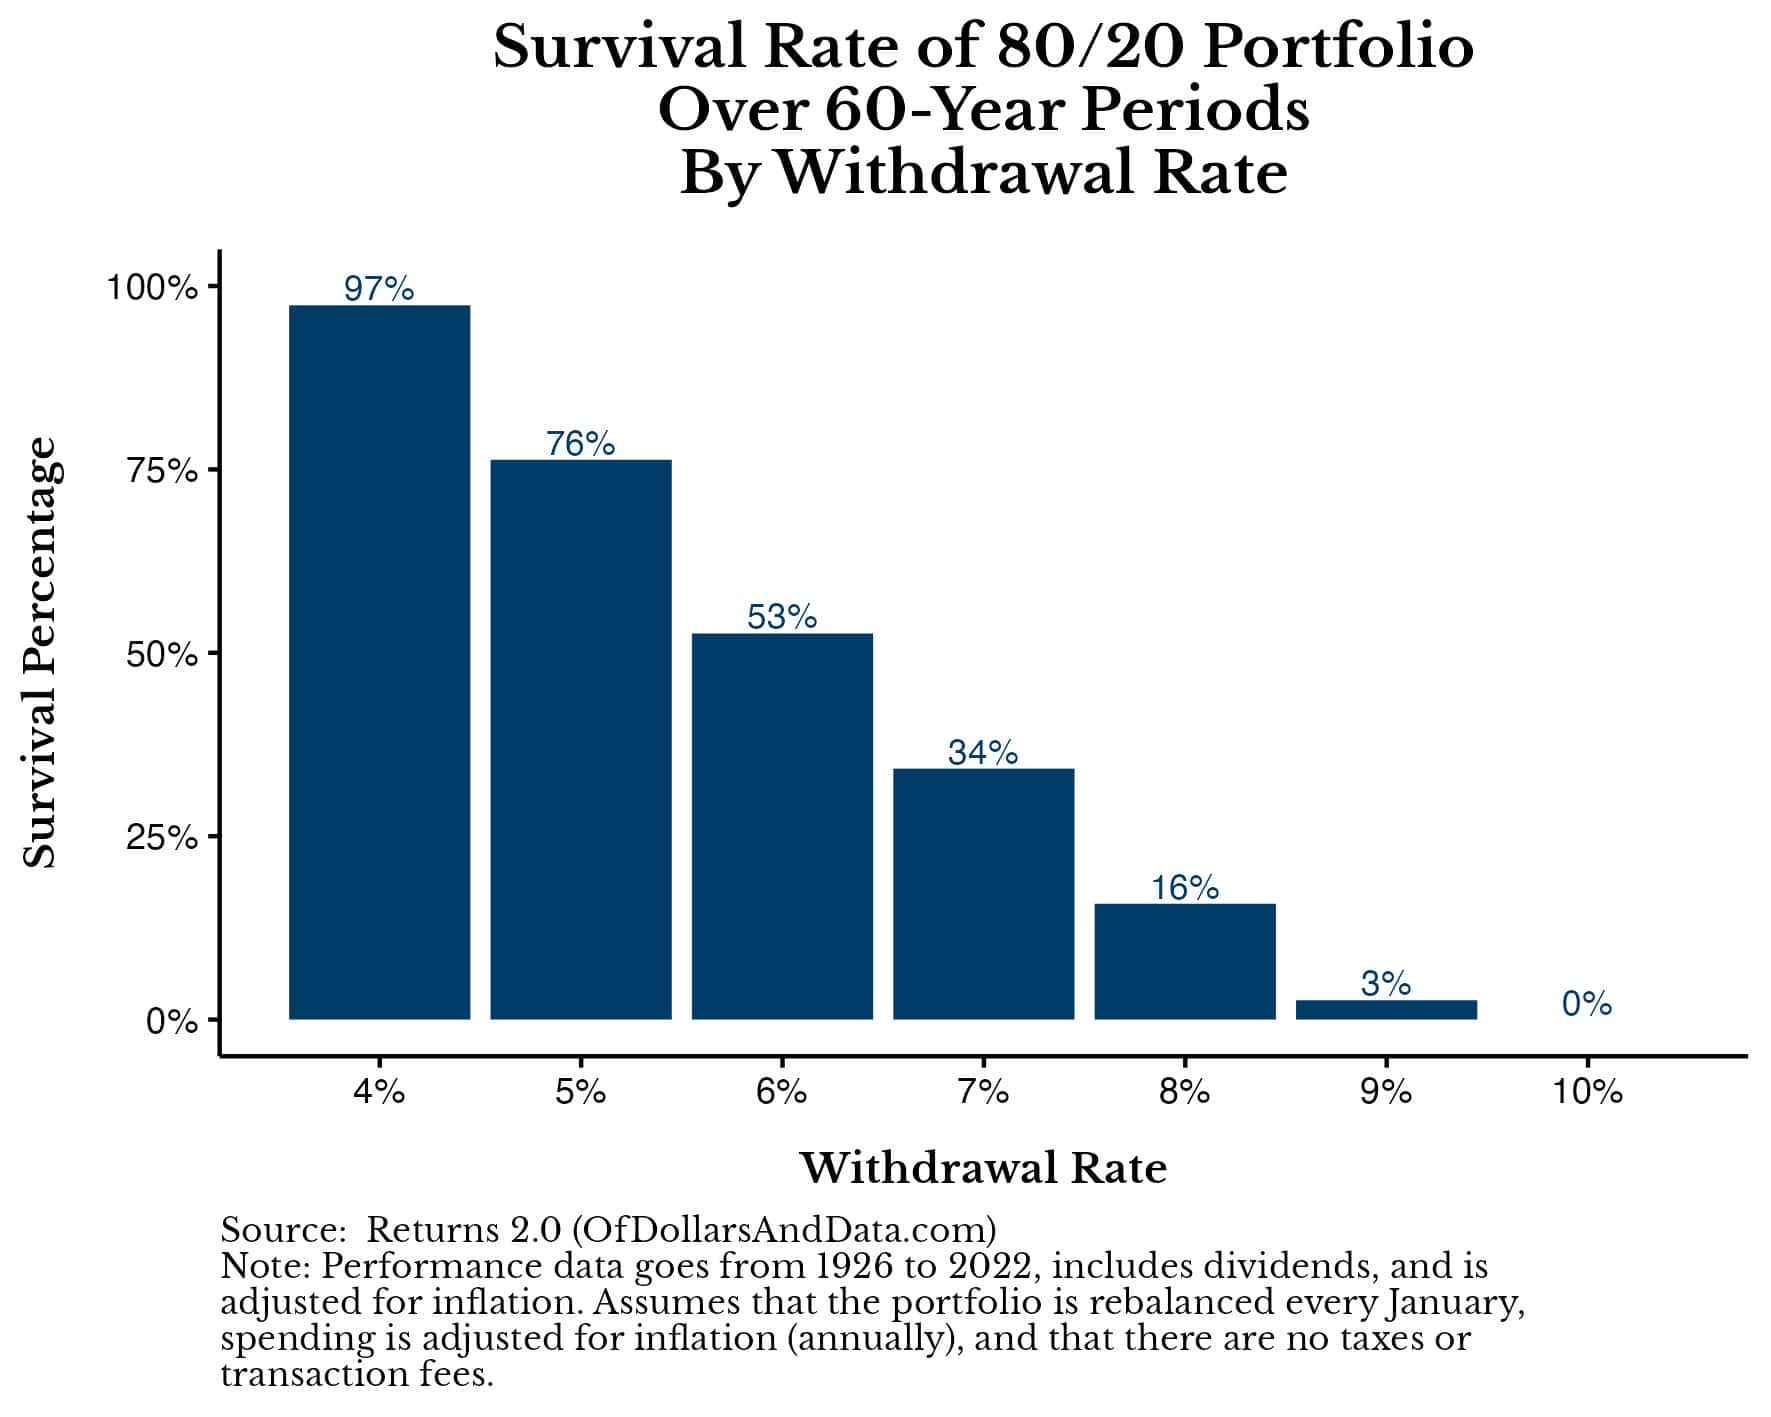 Survival rate for 80/20 portfolio over all 60 year periods from 1926 to 2022.